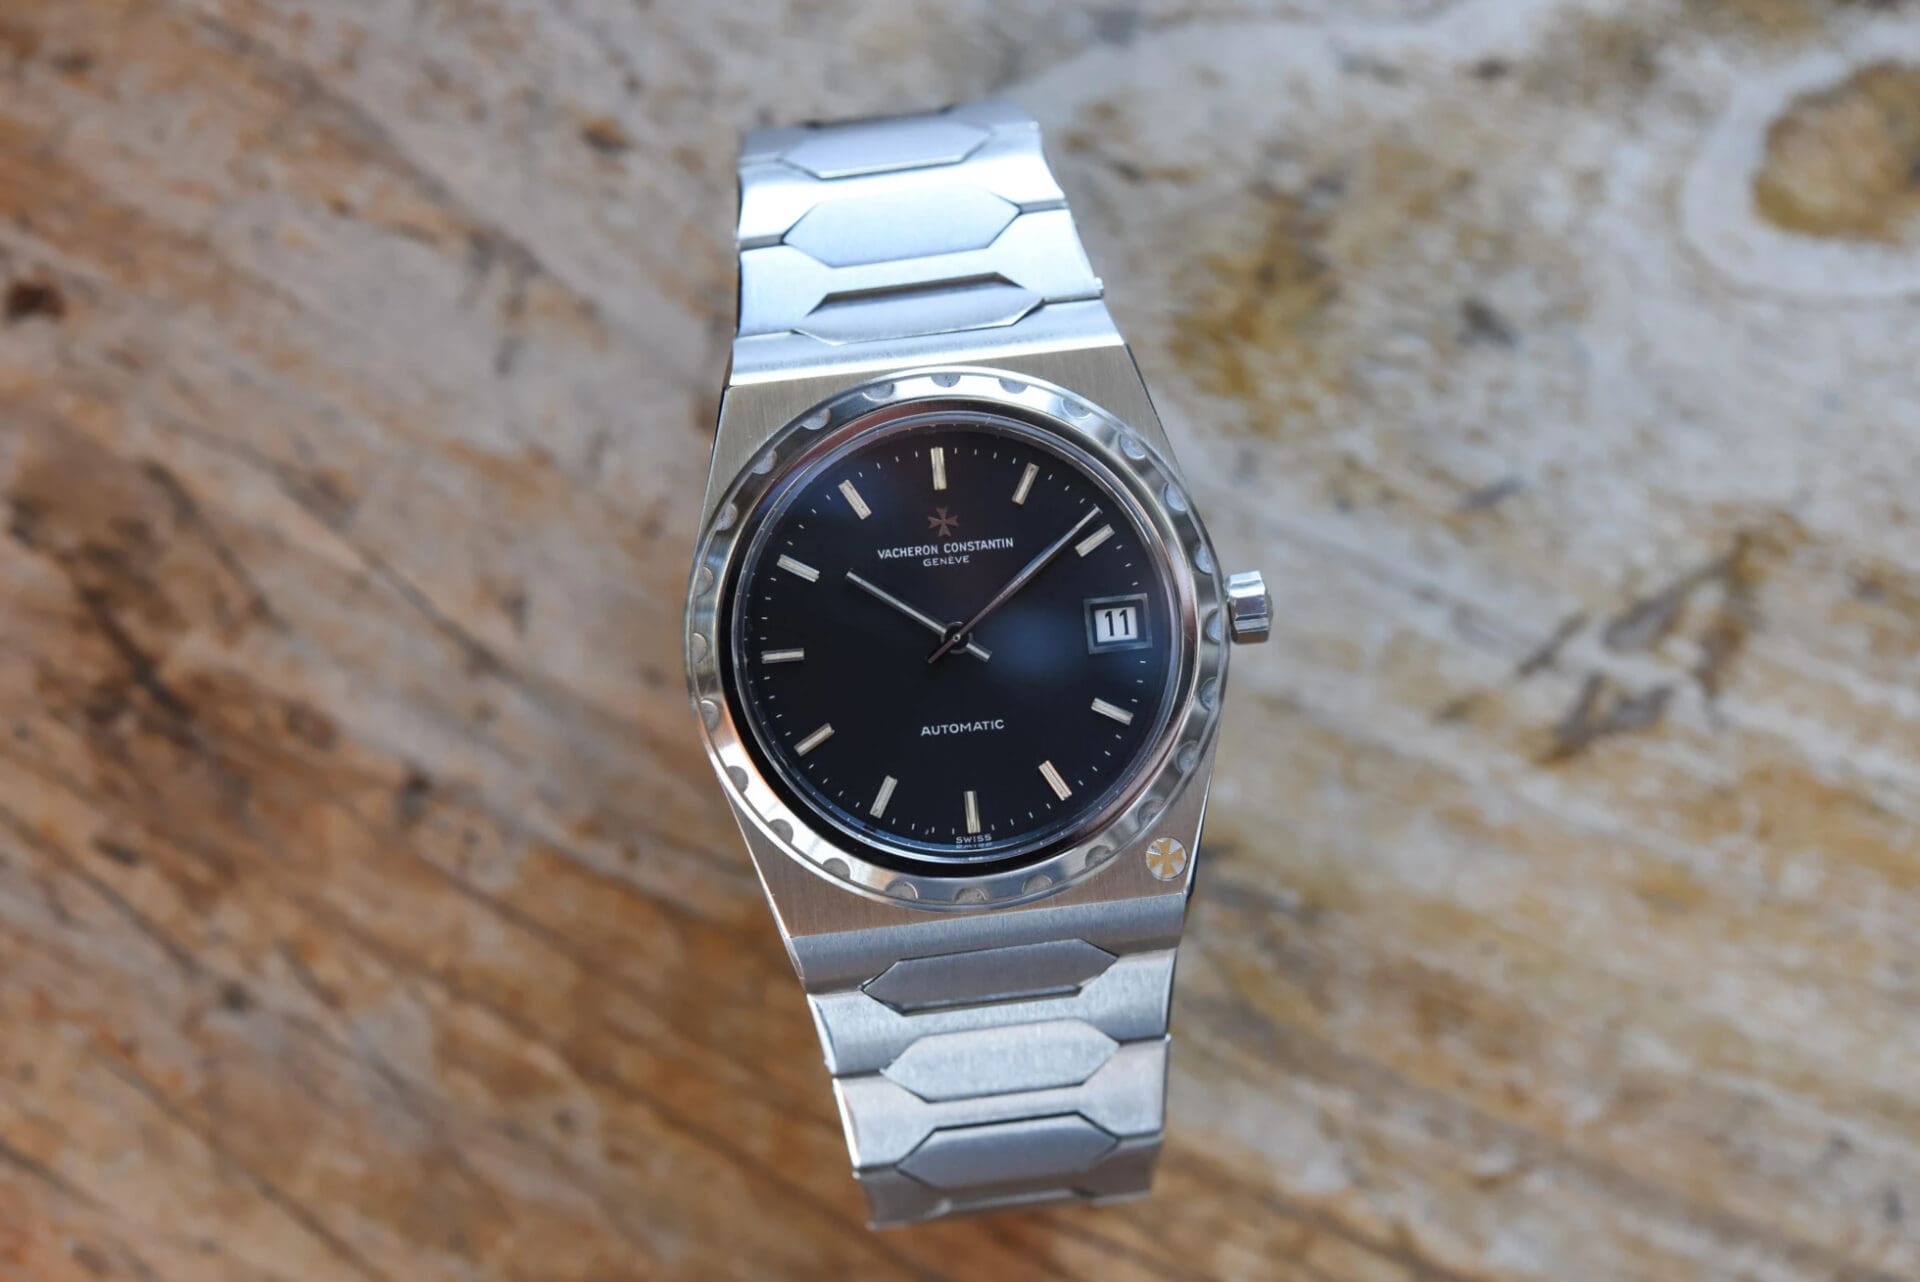 This reader just found a Vacheron Constantin 222 in his sock drawer worth $115k